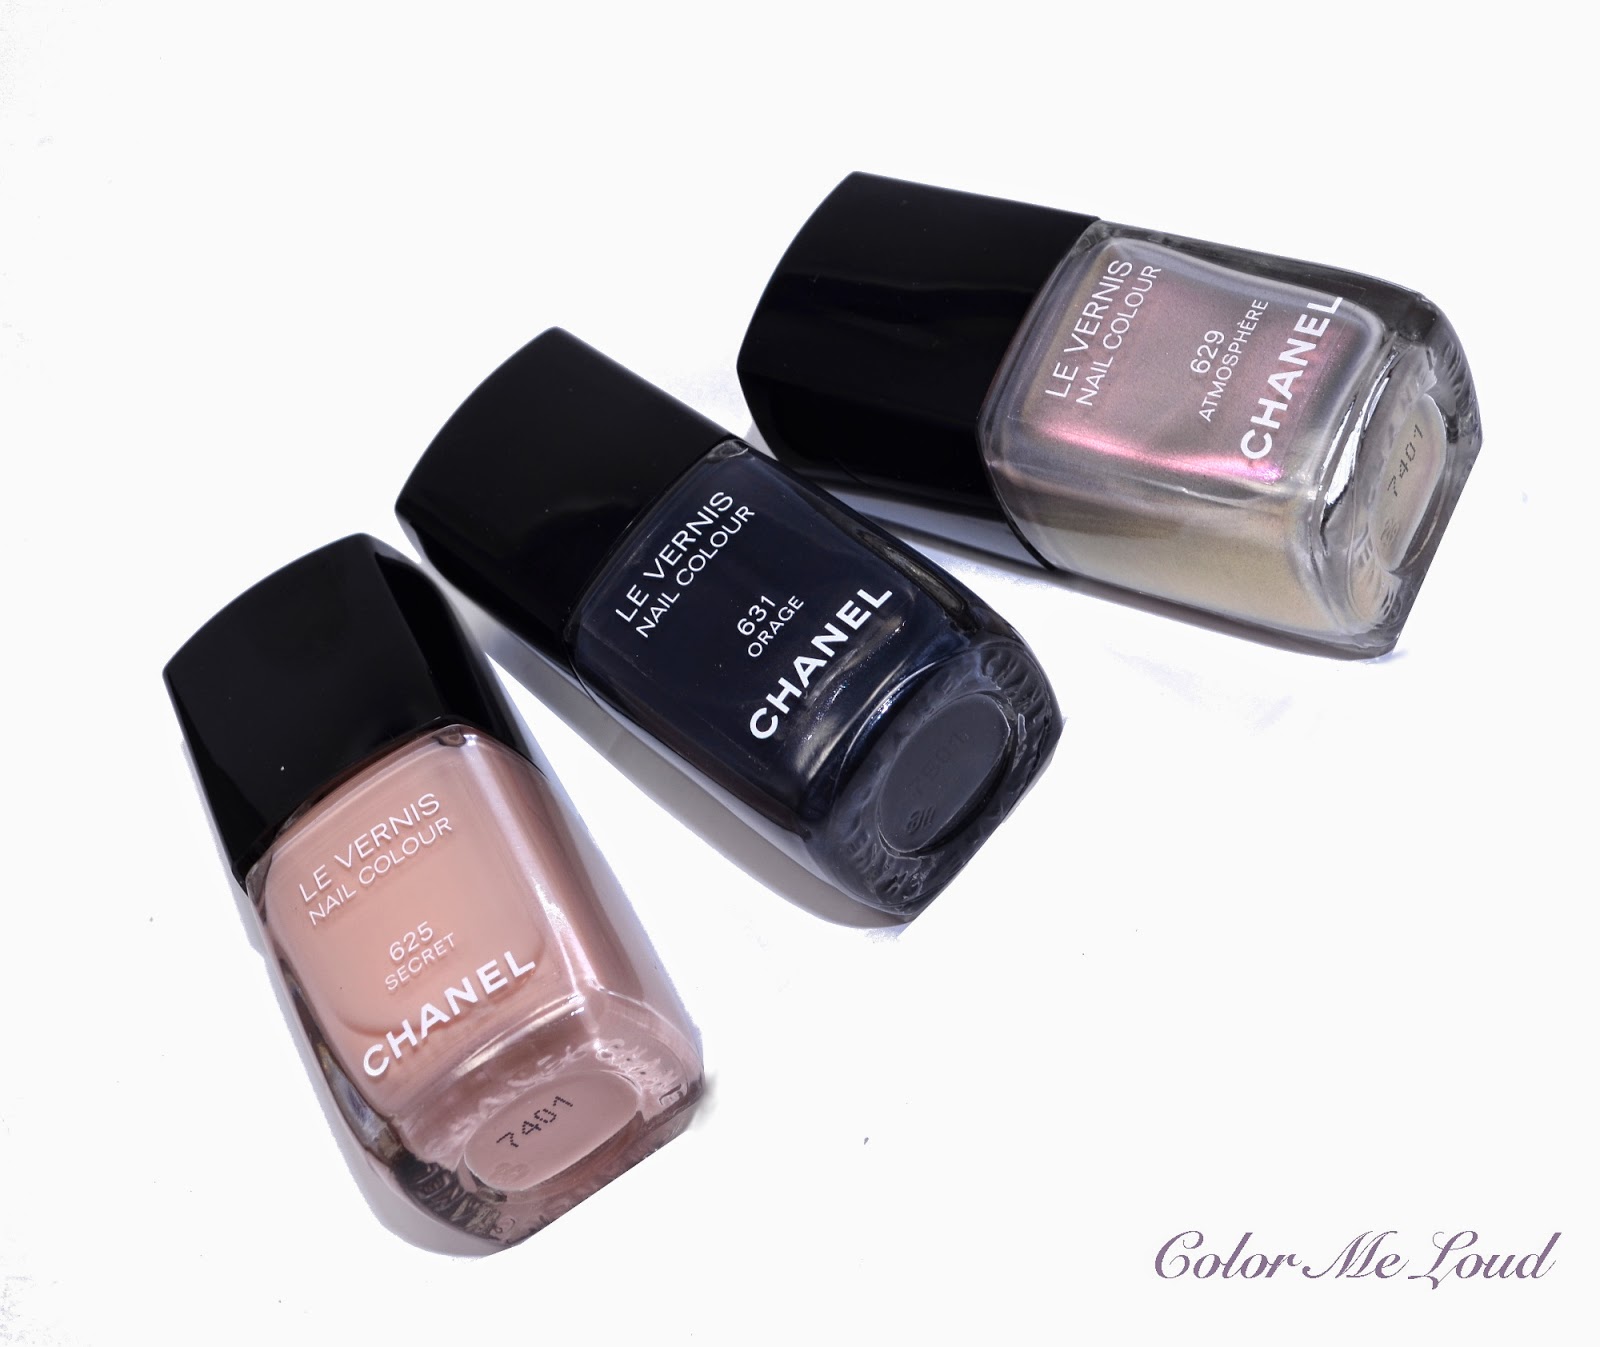 Chanel Le Vernis #625 Secret, #629 Atmosphere and #631 Orage from États Poétiques Fall 2014 Collection, Review, Swatch & Comparison